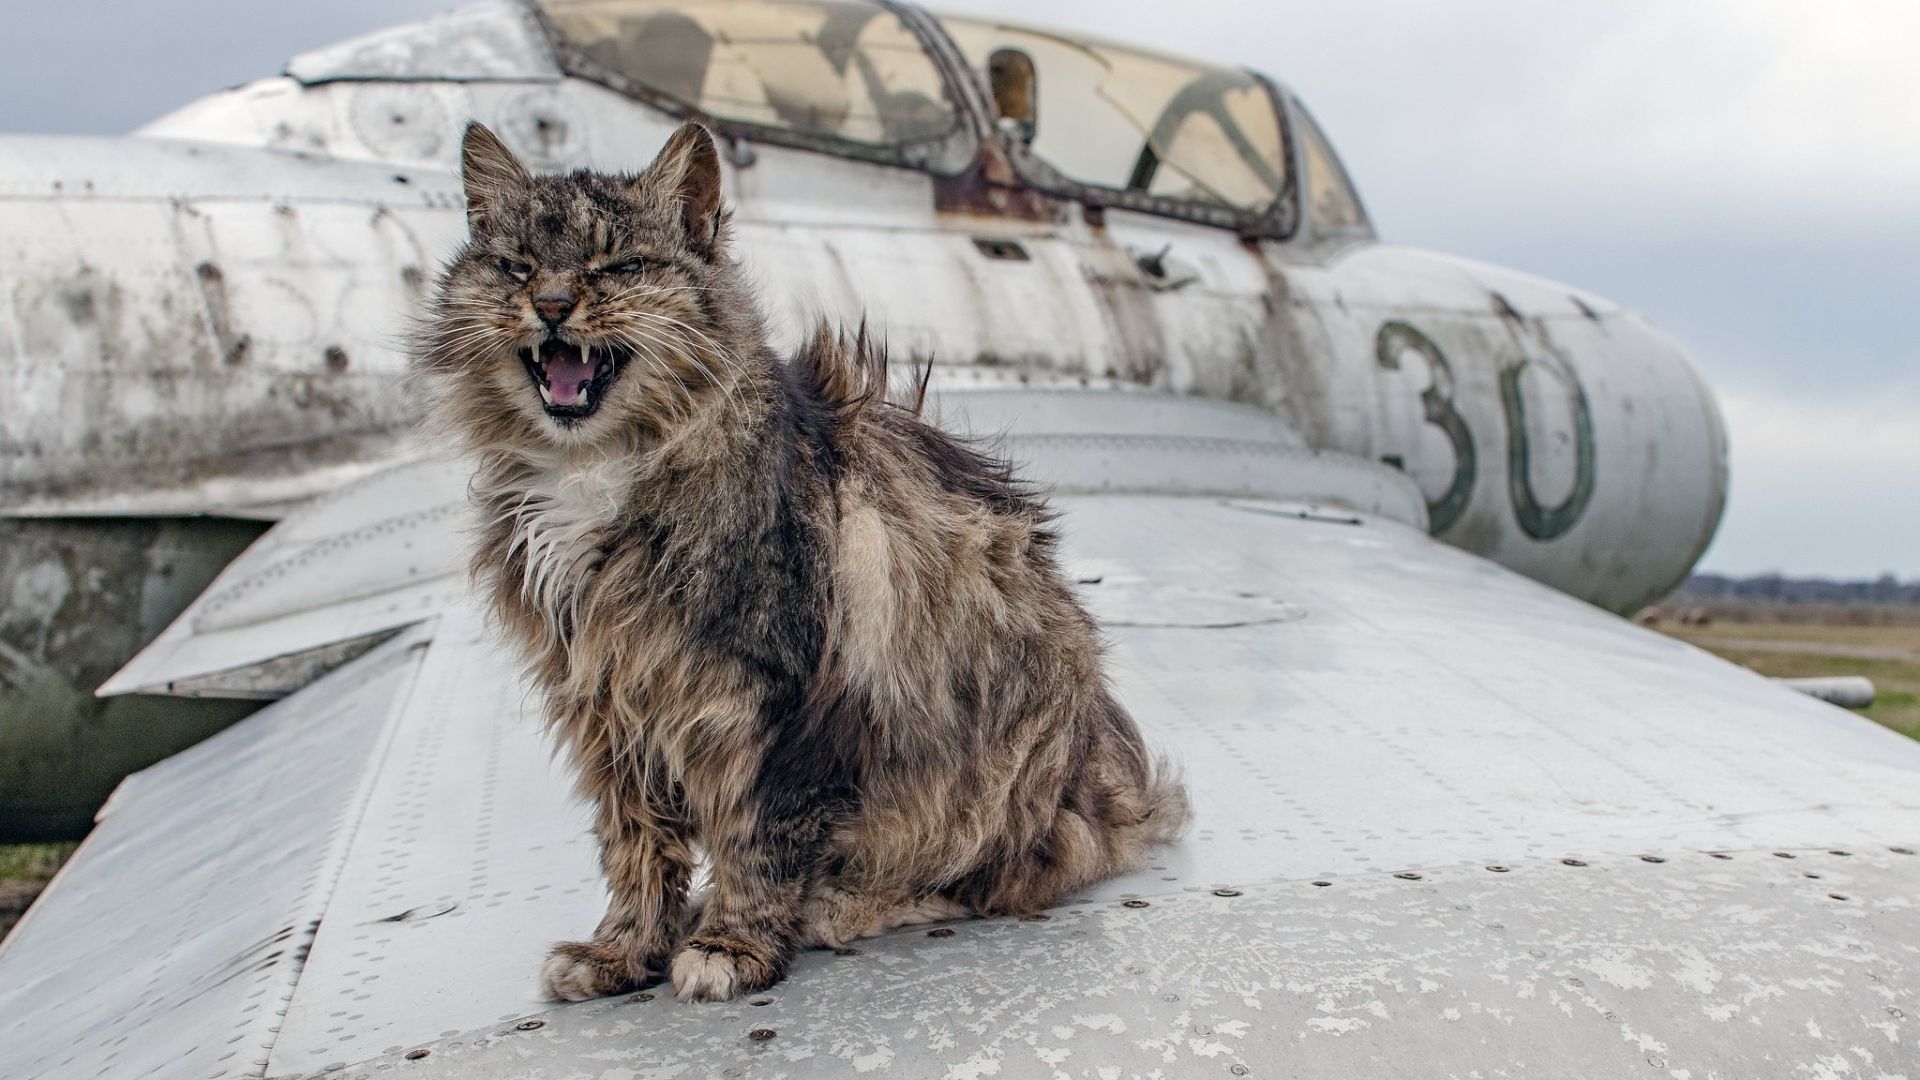 Wallpaper Angry cat sitting on wings of wreck plane